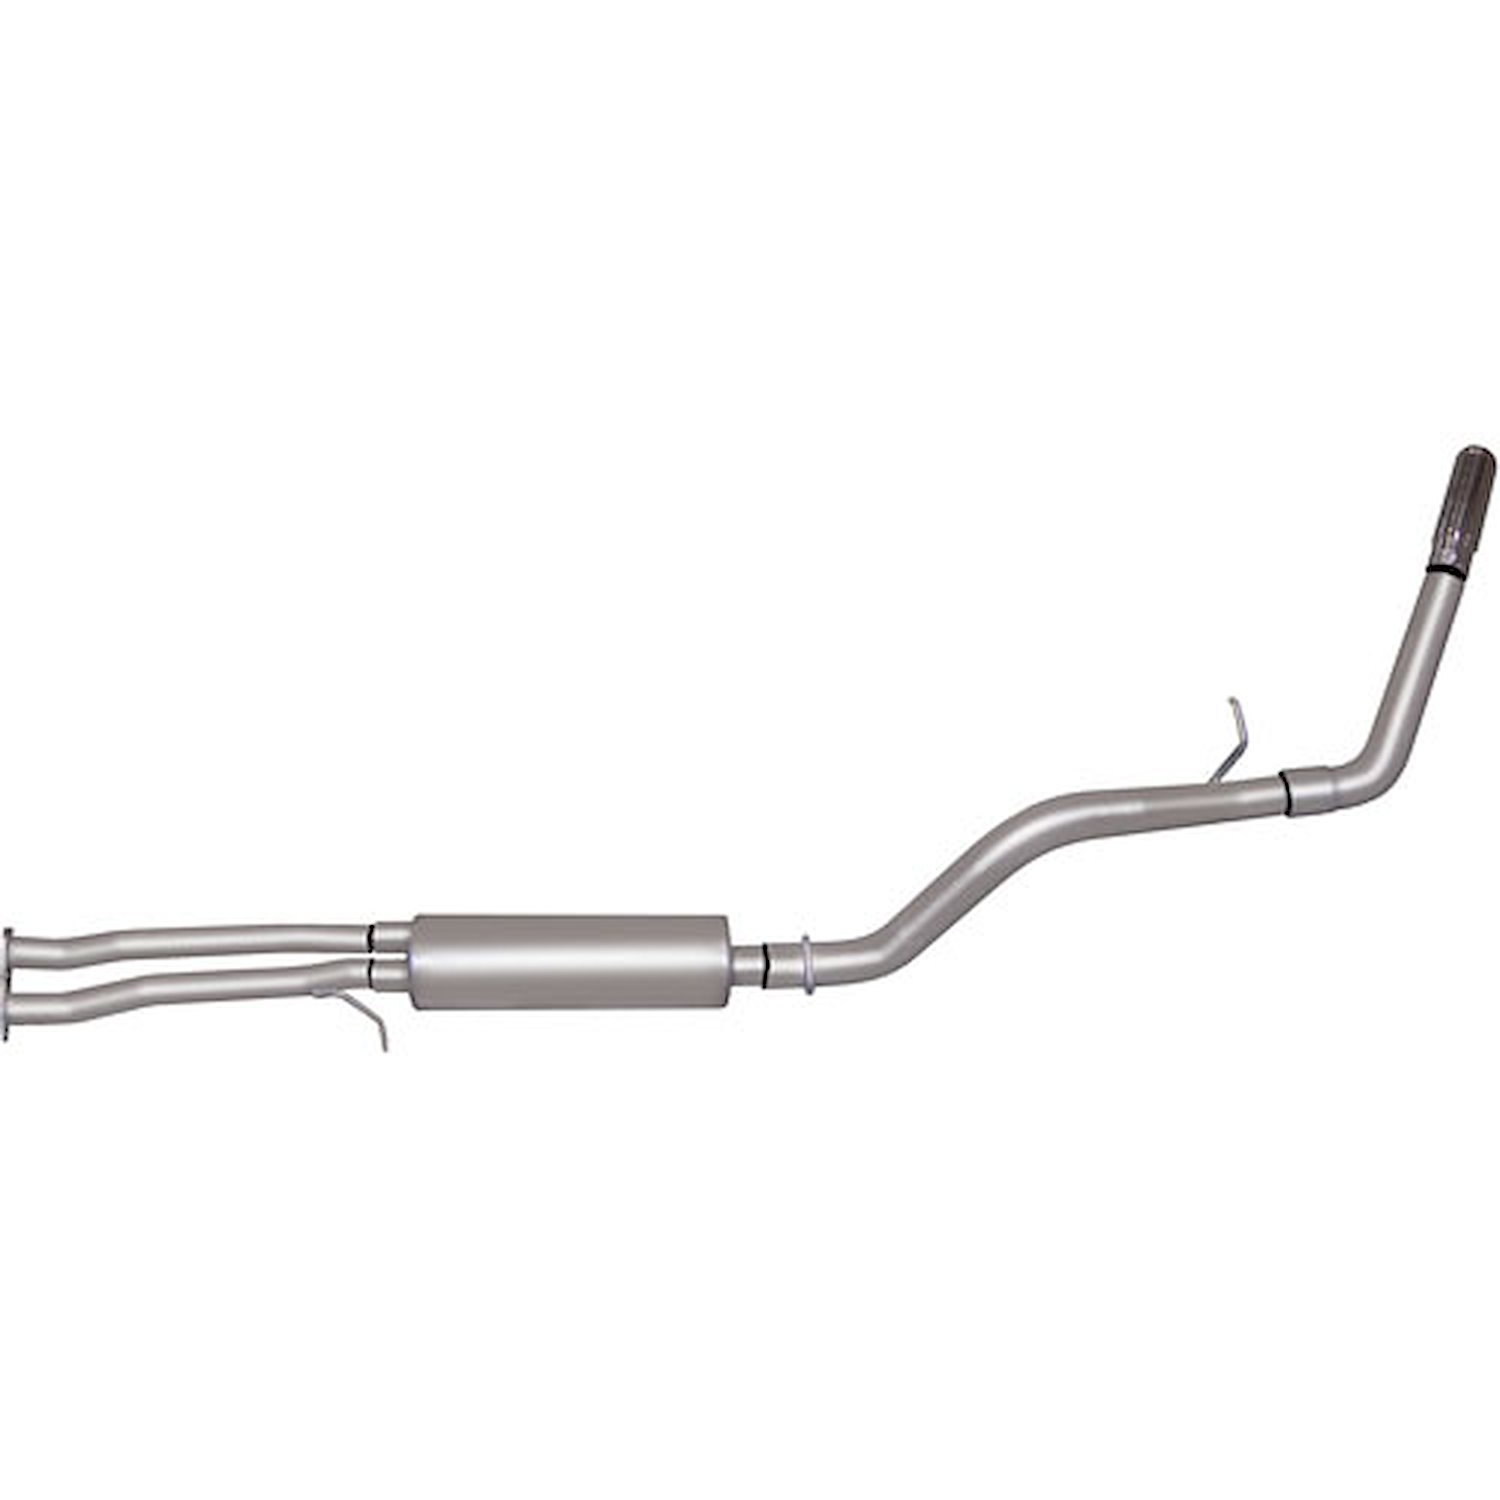 Swept-Side Cat-Back Exhaust 1996-99 Chevy Suburban 5.7L